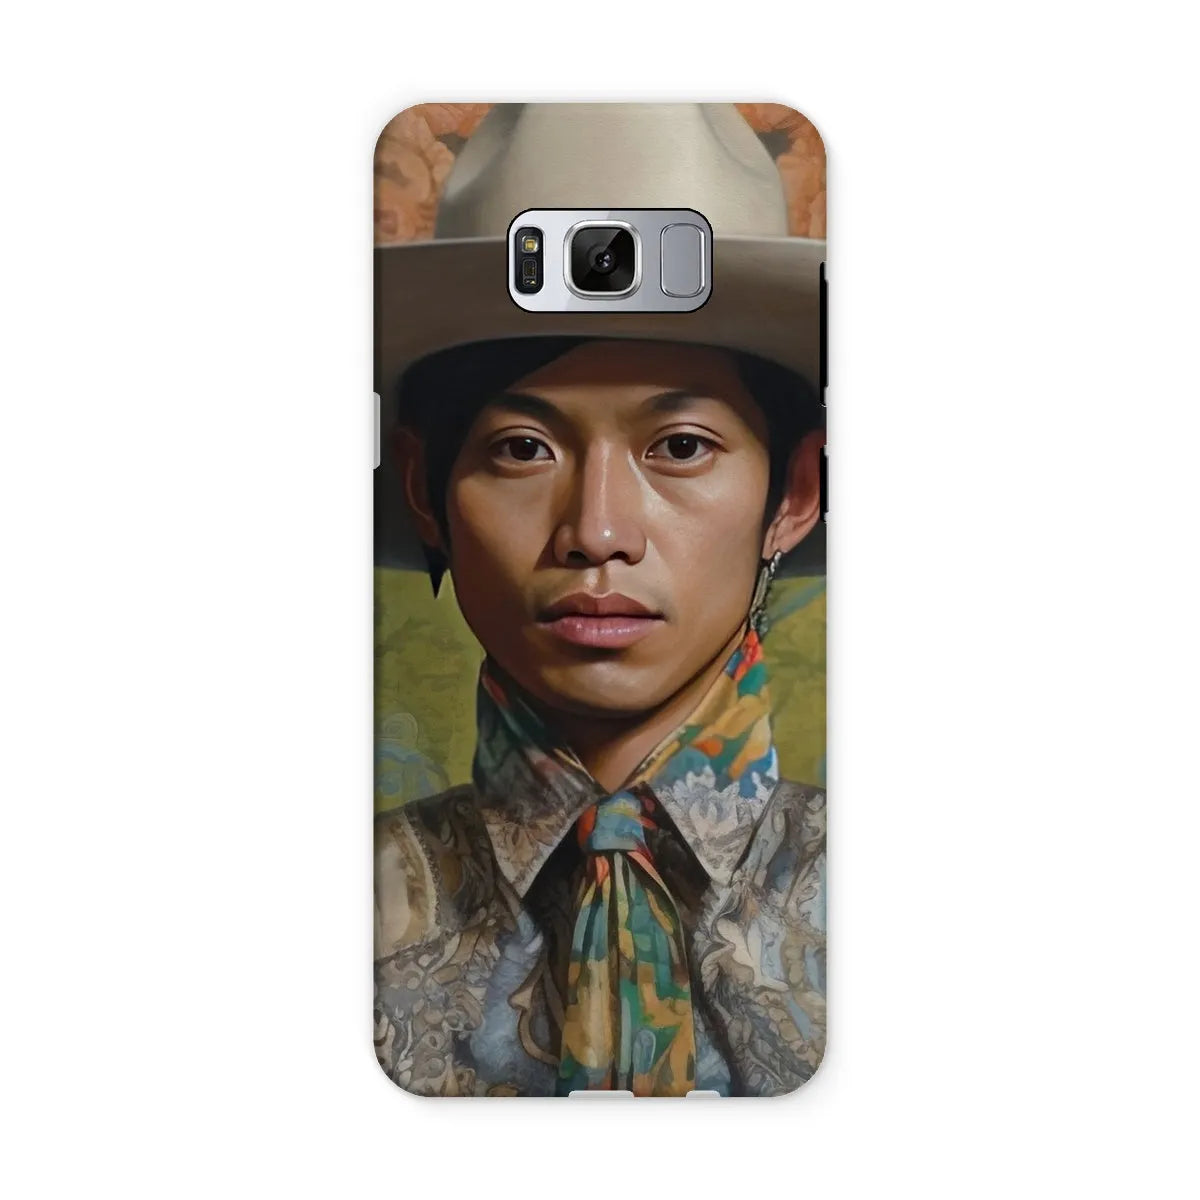 Junada The Gay Cowboy - Dandy Gay Aesthetic Art Phone Case - Samsung Galaxy S8 / Matte - Mobile Phone Cases - Aesthetic